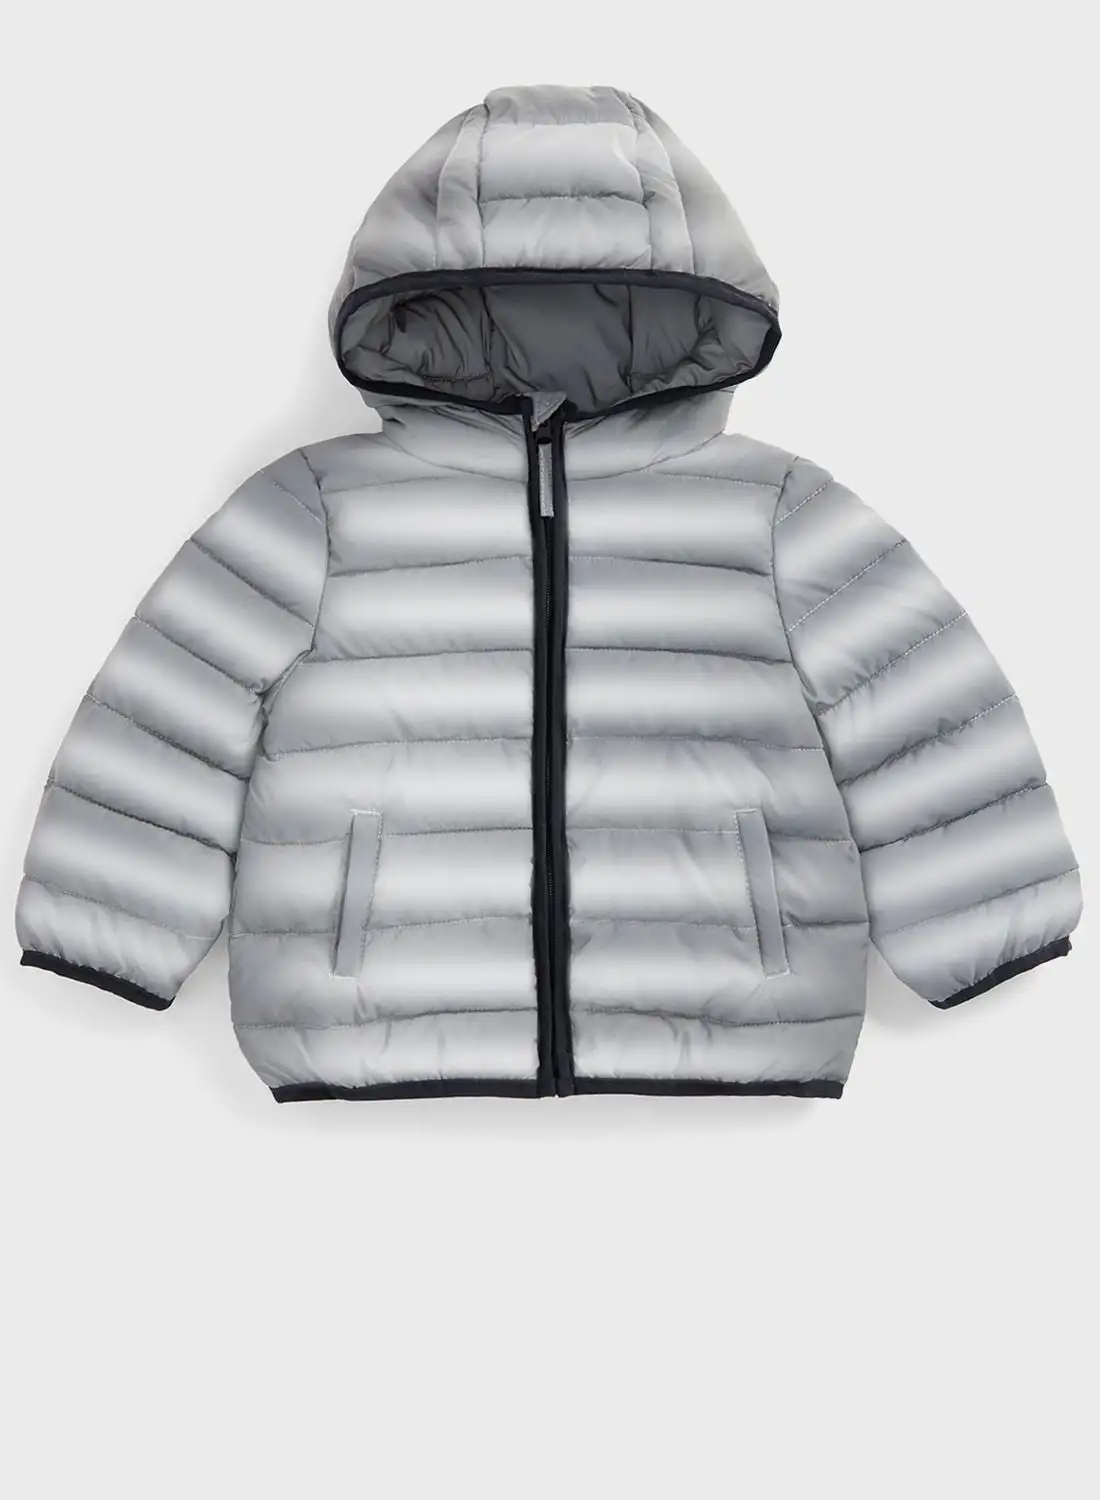 mothercare Kids Reflective Hooded Puffer Jacket